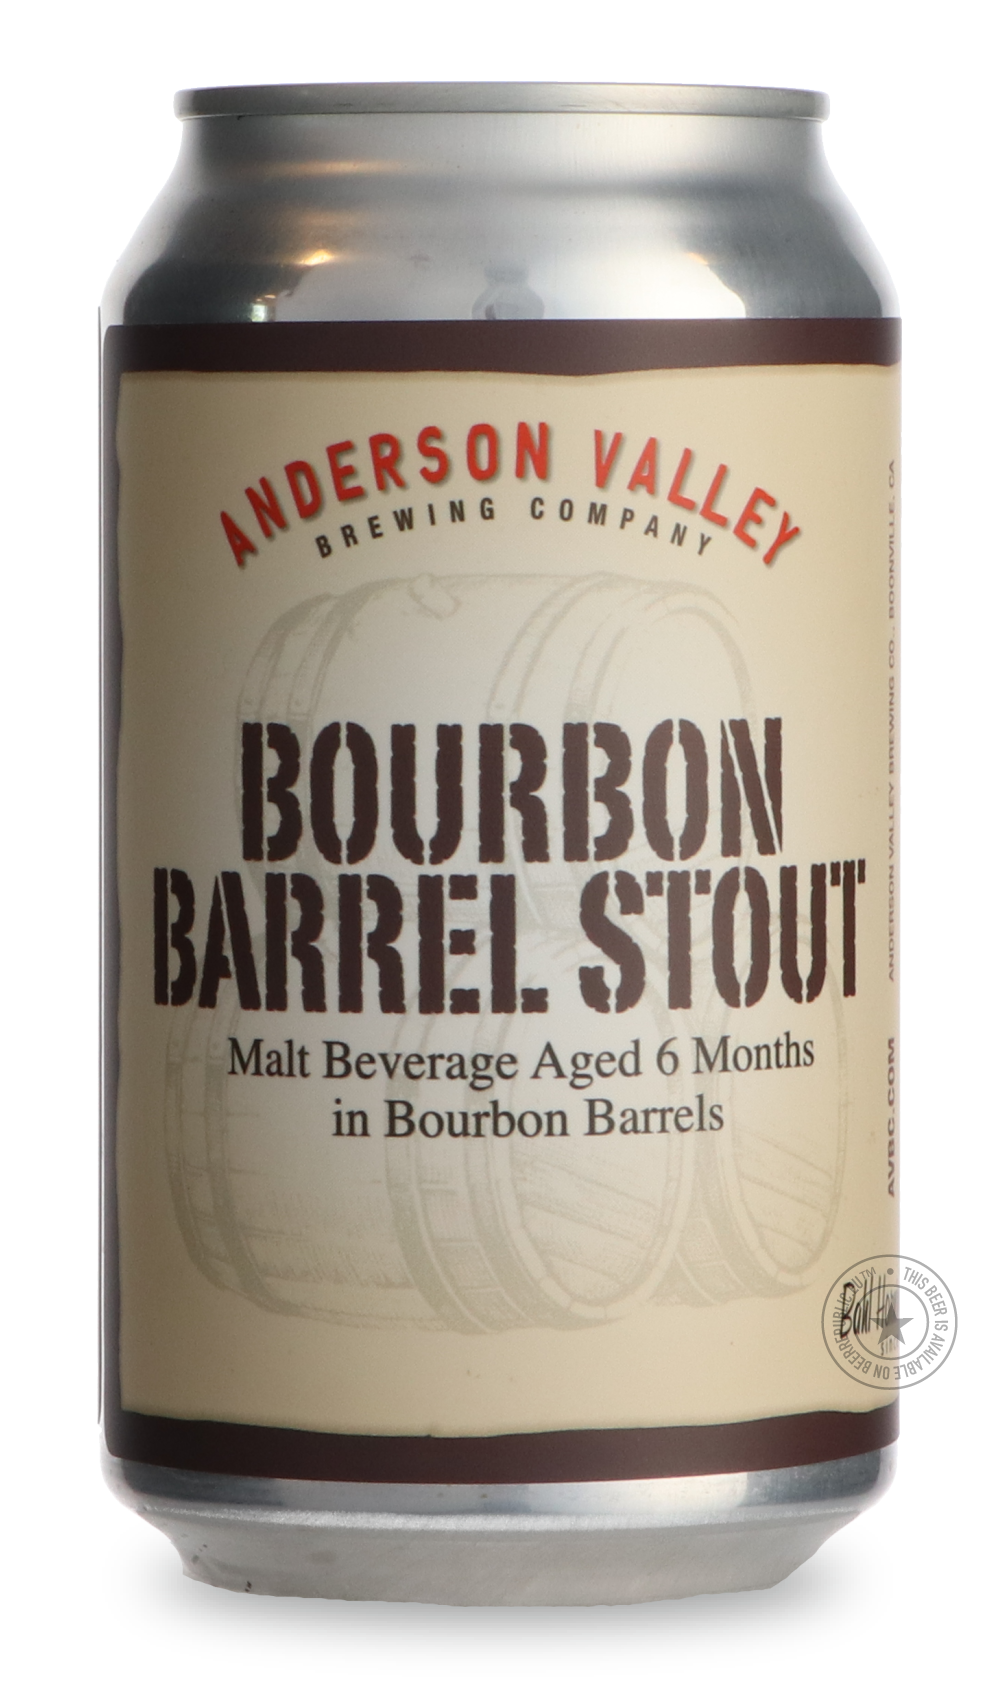 -Anderson Valley- Bourbon Barrel Stout-Stout & Porter- Only @ Beer Republic - The best online beer store for American & Canadian craft beer - Buy beer online from the USA and Canada - Bier online kopen - Amerikaans bier kopen - Craft beer store - Craft beer kopen - Amerikanisch bier kaufen - Bier online kaufen - Acheter biere online - IPA - Stout - Porter - New England IPA - Hazy IPA - Imperial Stout - Barrel Aged - Barrel Aged Imperial Stout - Brown - Dark beer - Blond - Blonde - Pilsner - Lager - Wheat - 